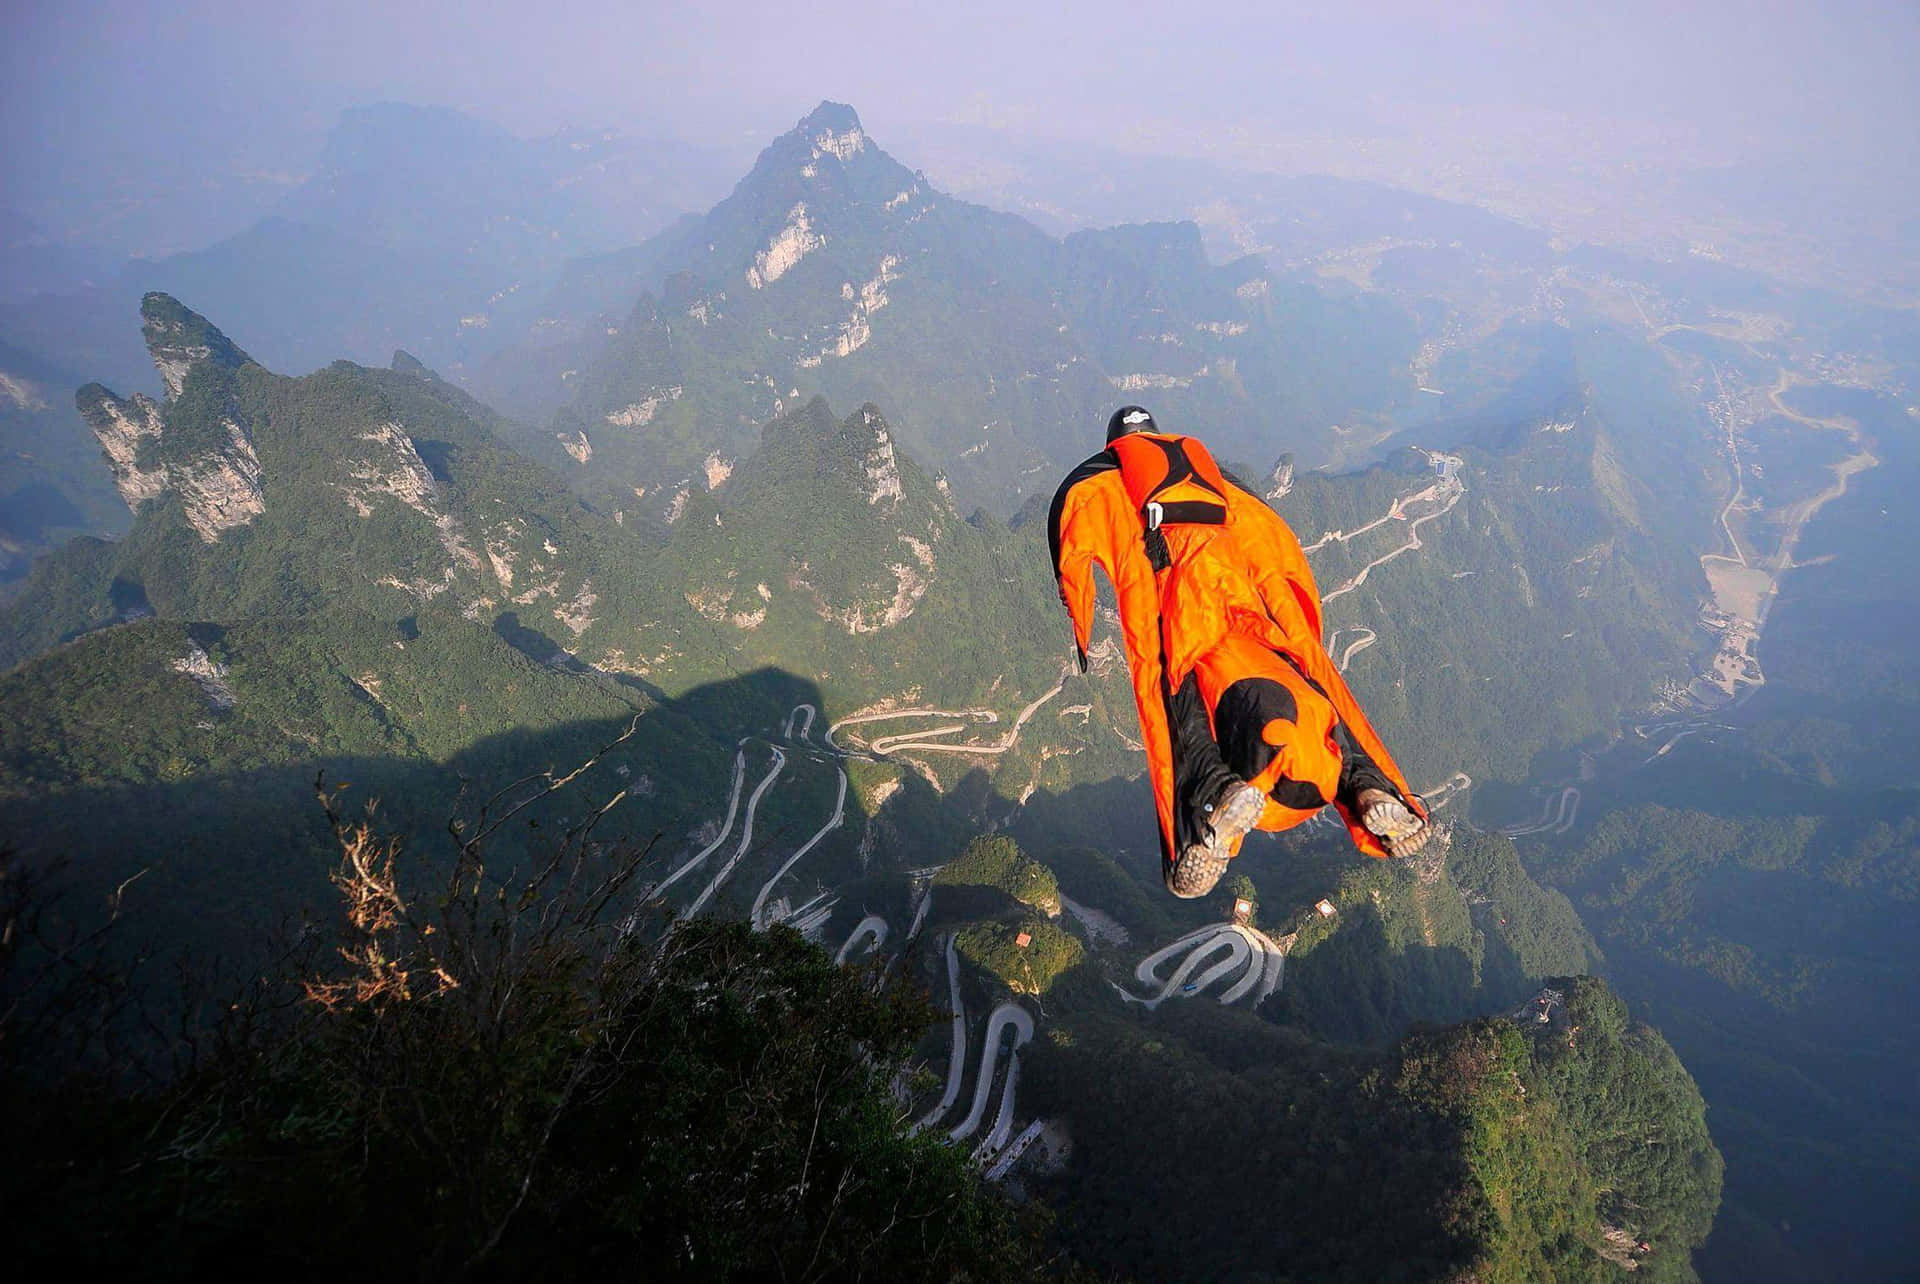 A Man Flying In The Air Over A Mountain